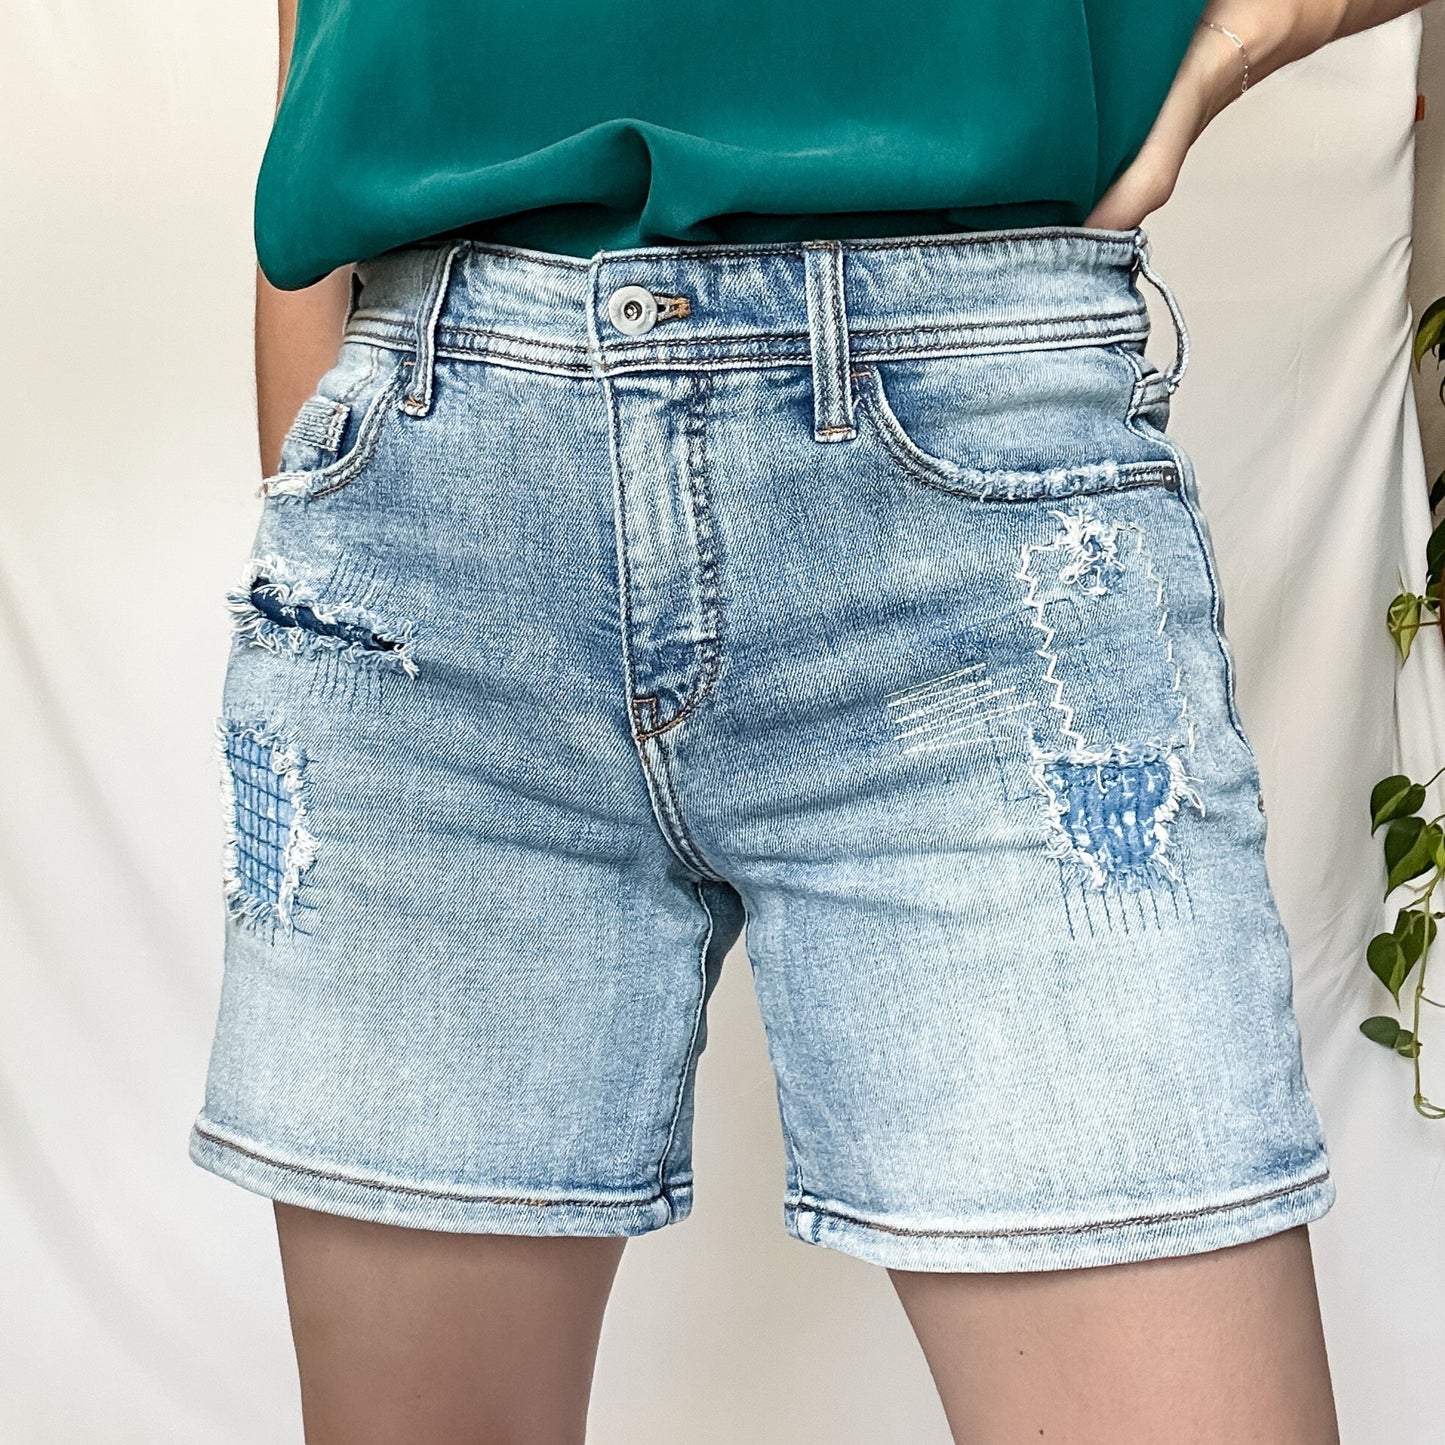 Anthropologie Slim Boyfriend Embroidered Patched Jean Shorts (size 29)